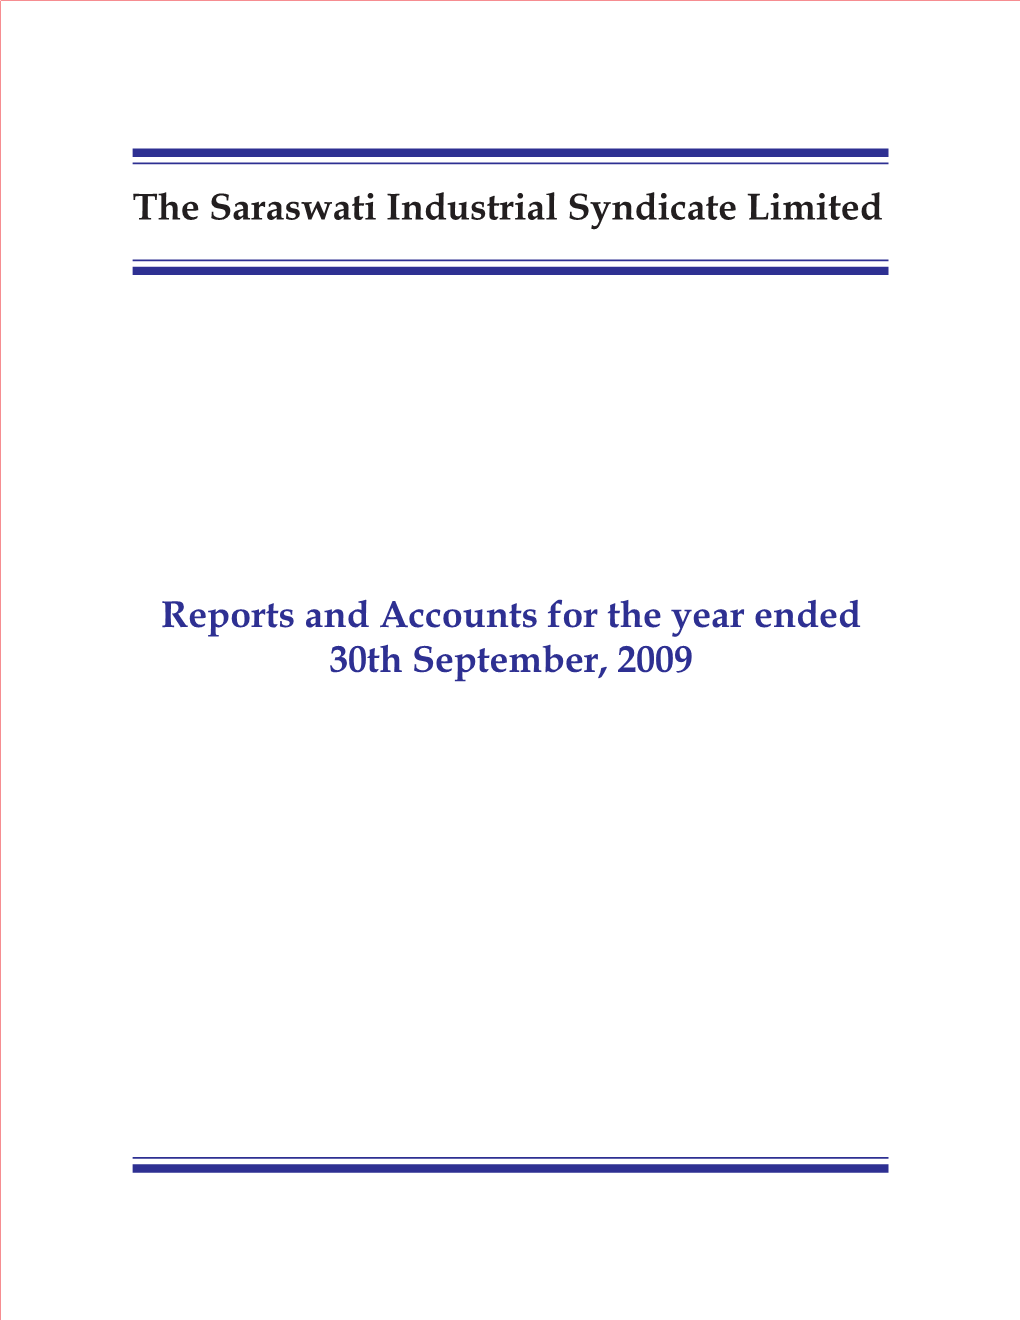 The Saraswati Industrial Syndicate Limited